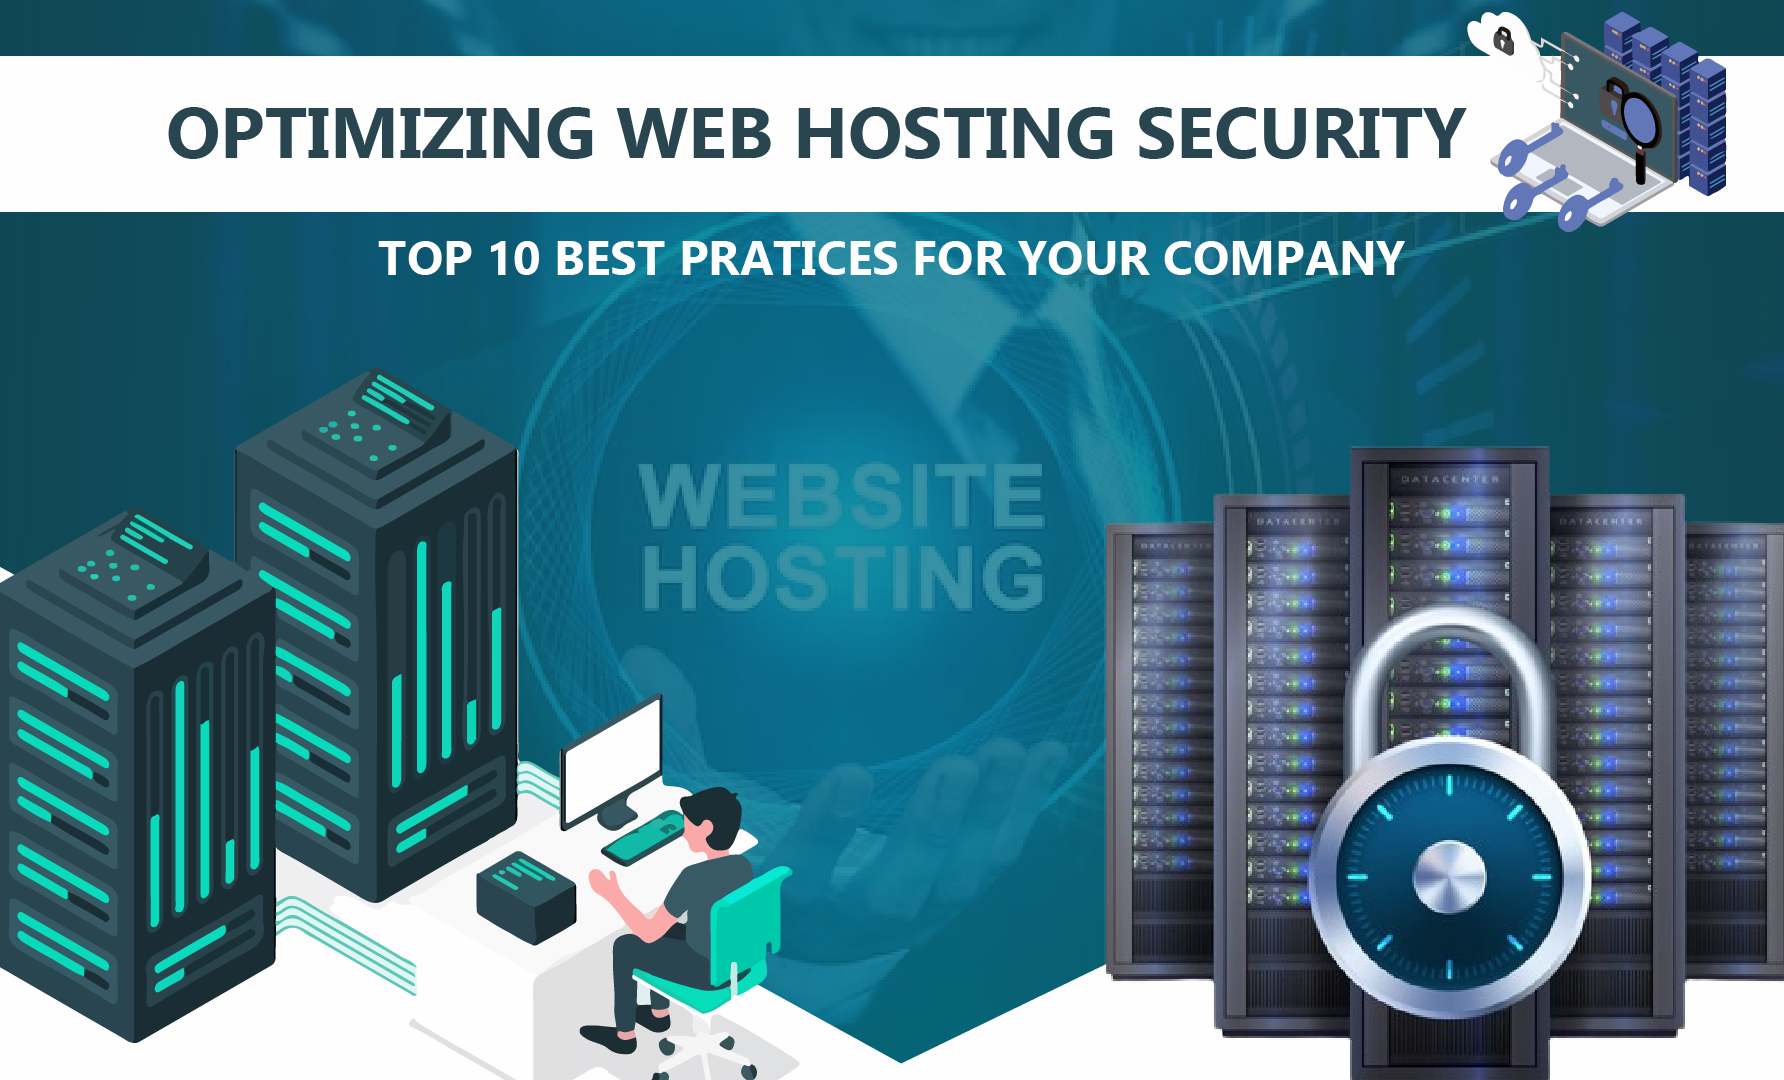 How to Improve Web Hosting Security: Top 10 Recommended Features for Your Company